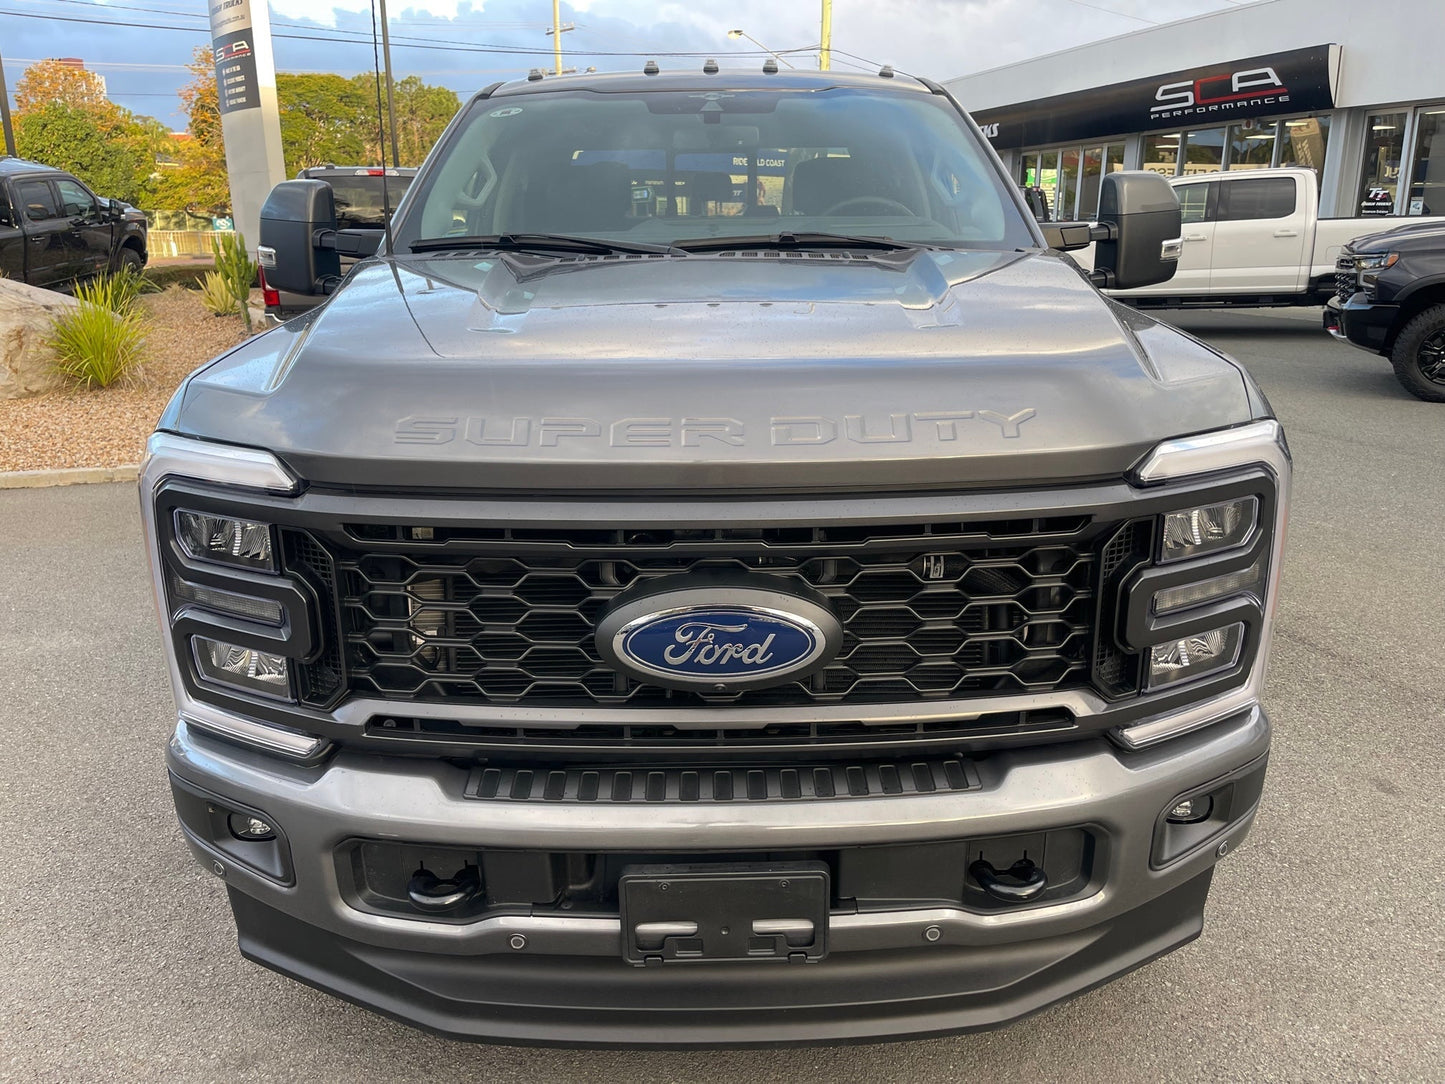 2023 Ford F250 Lariat 6 Seater in Carbonized Grey (STOCK #TT 4648)